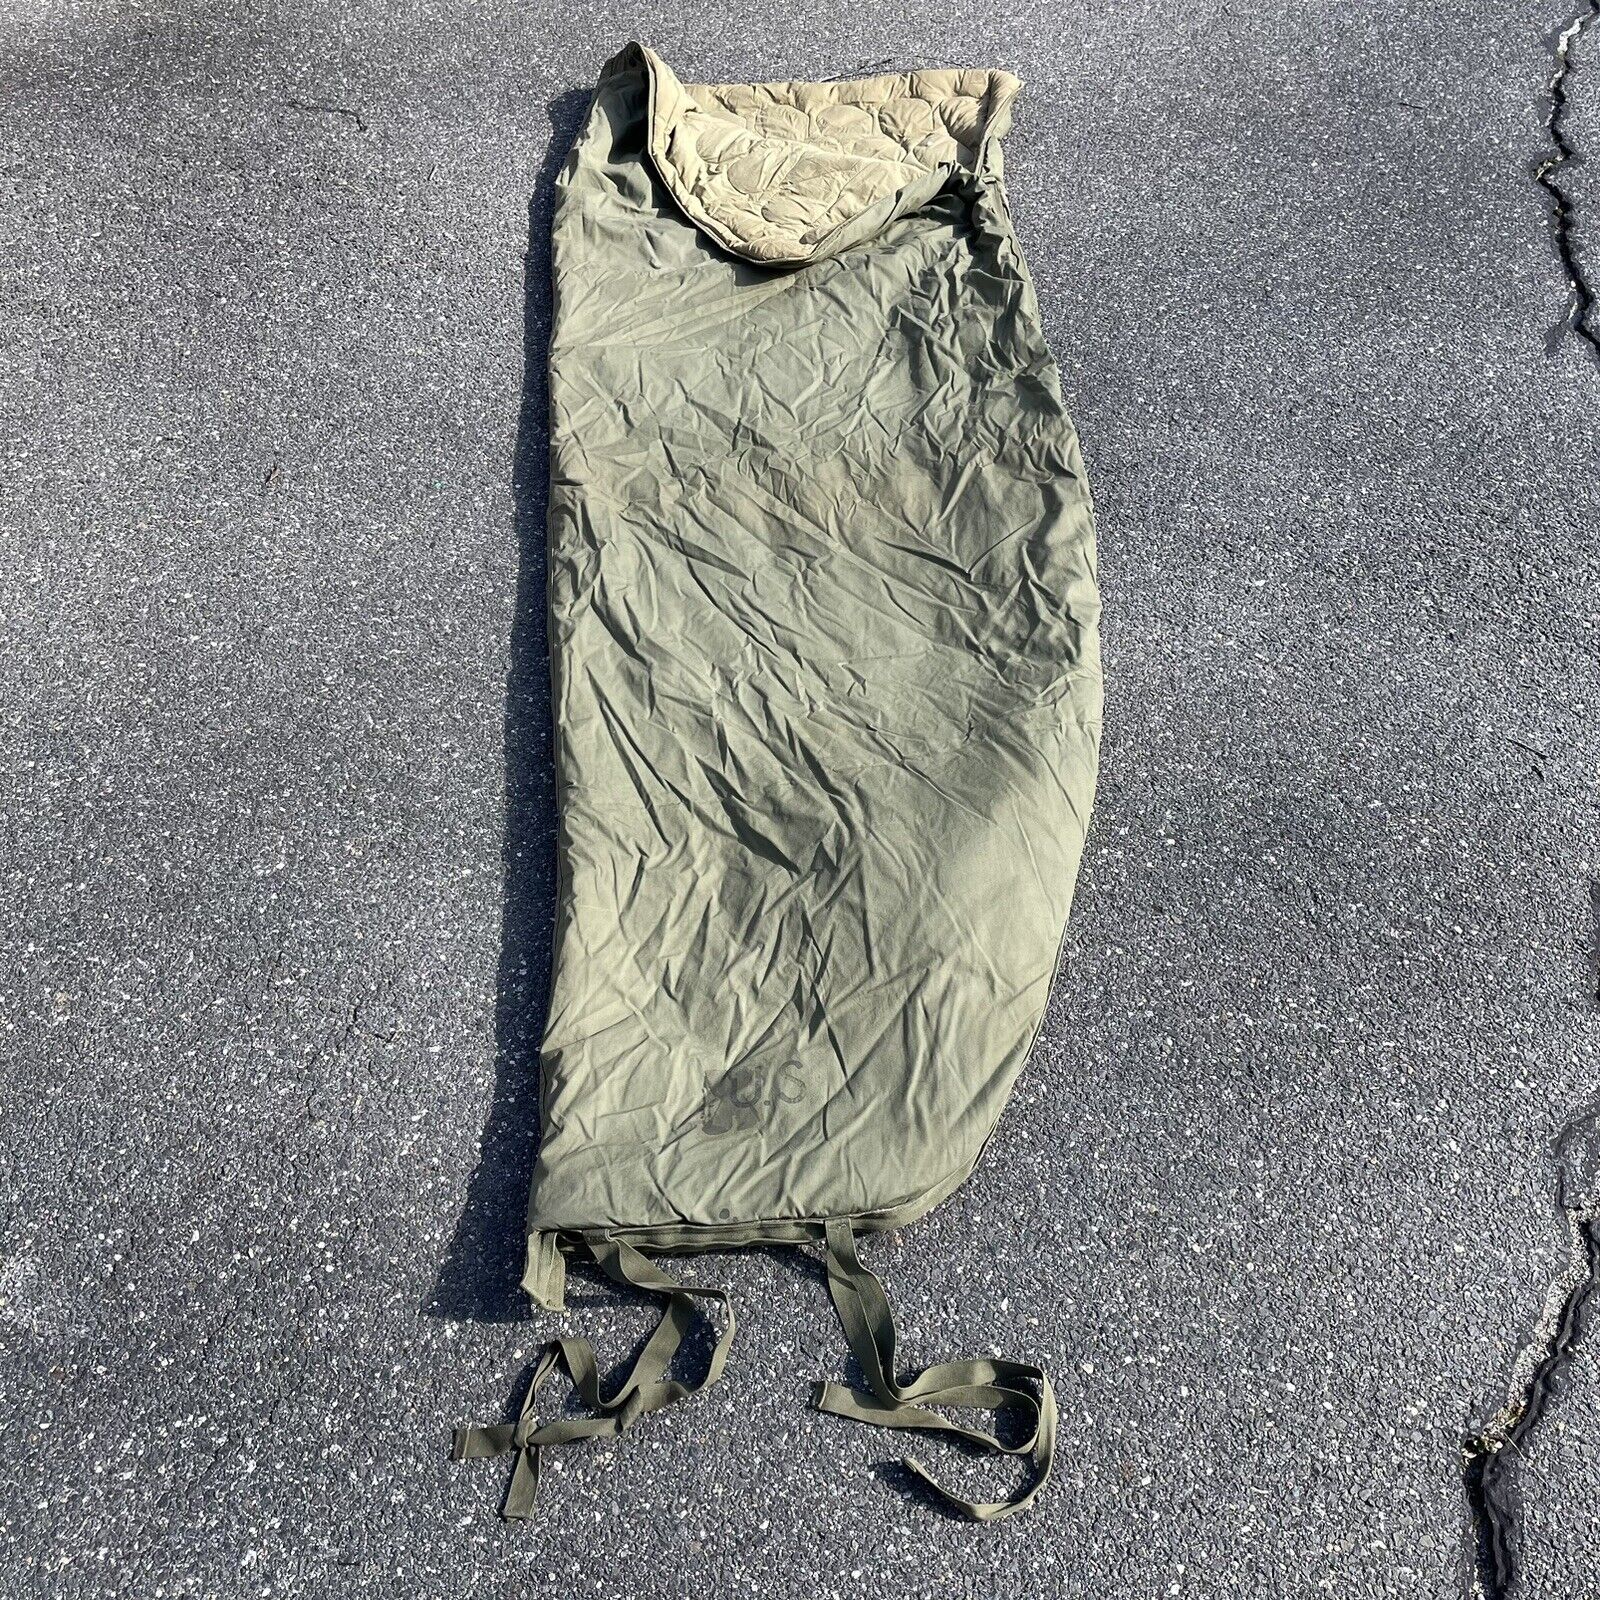 Vintage 1952 US Army Feather Filled Sleeping Bag Comforter 50s Military